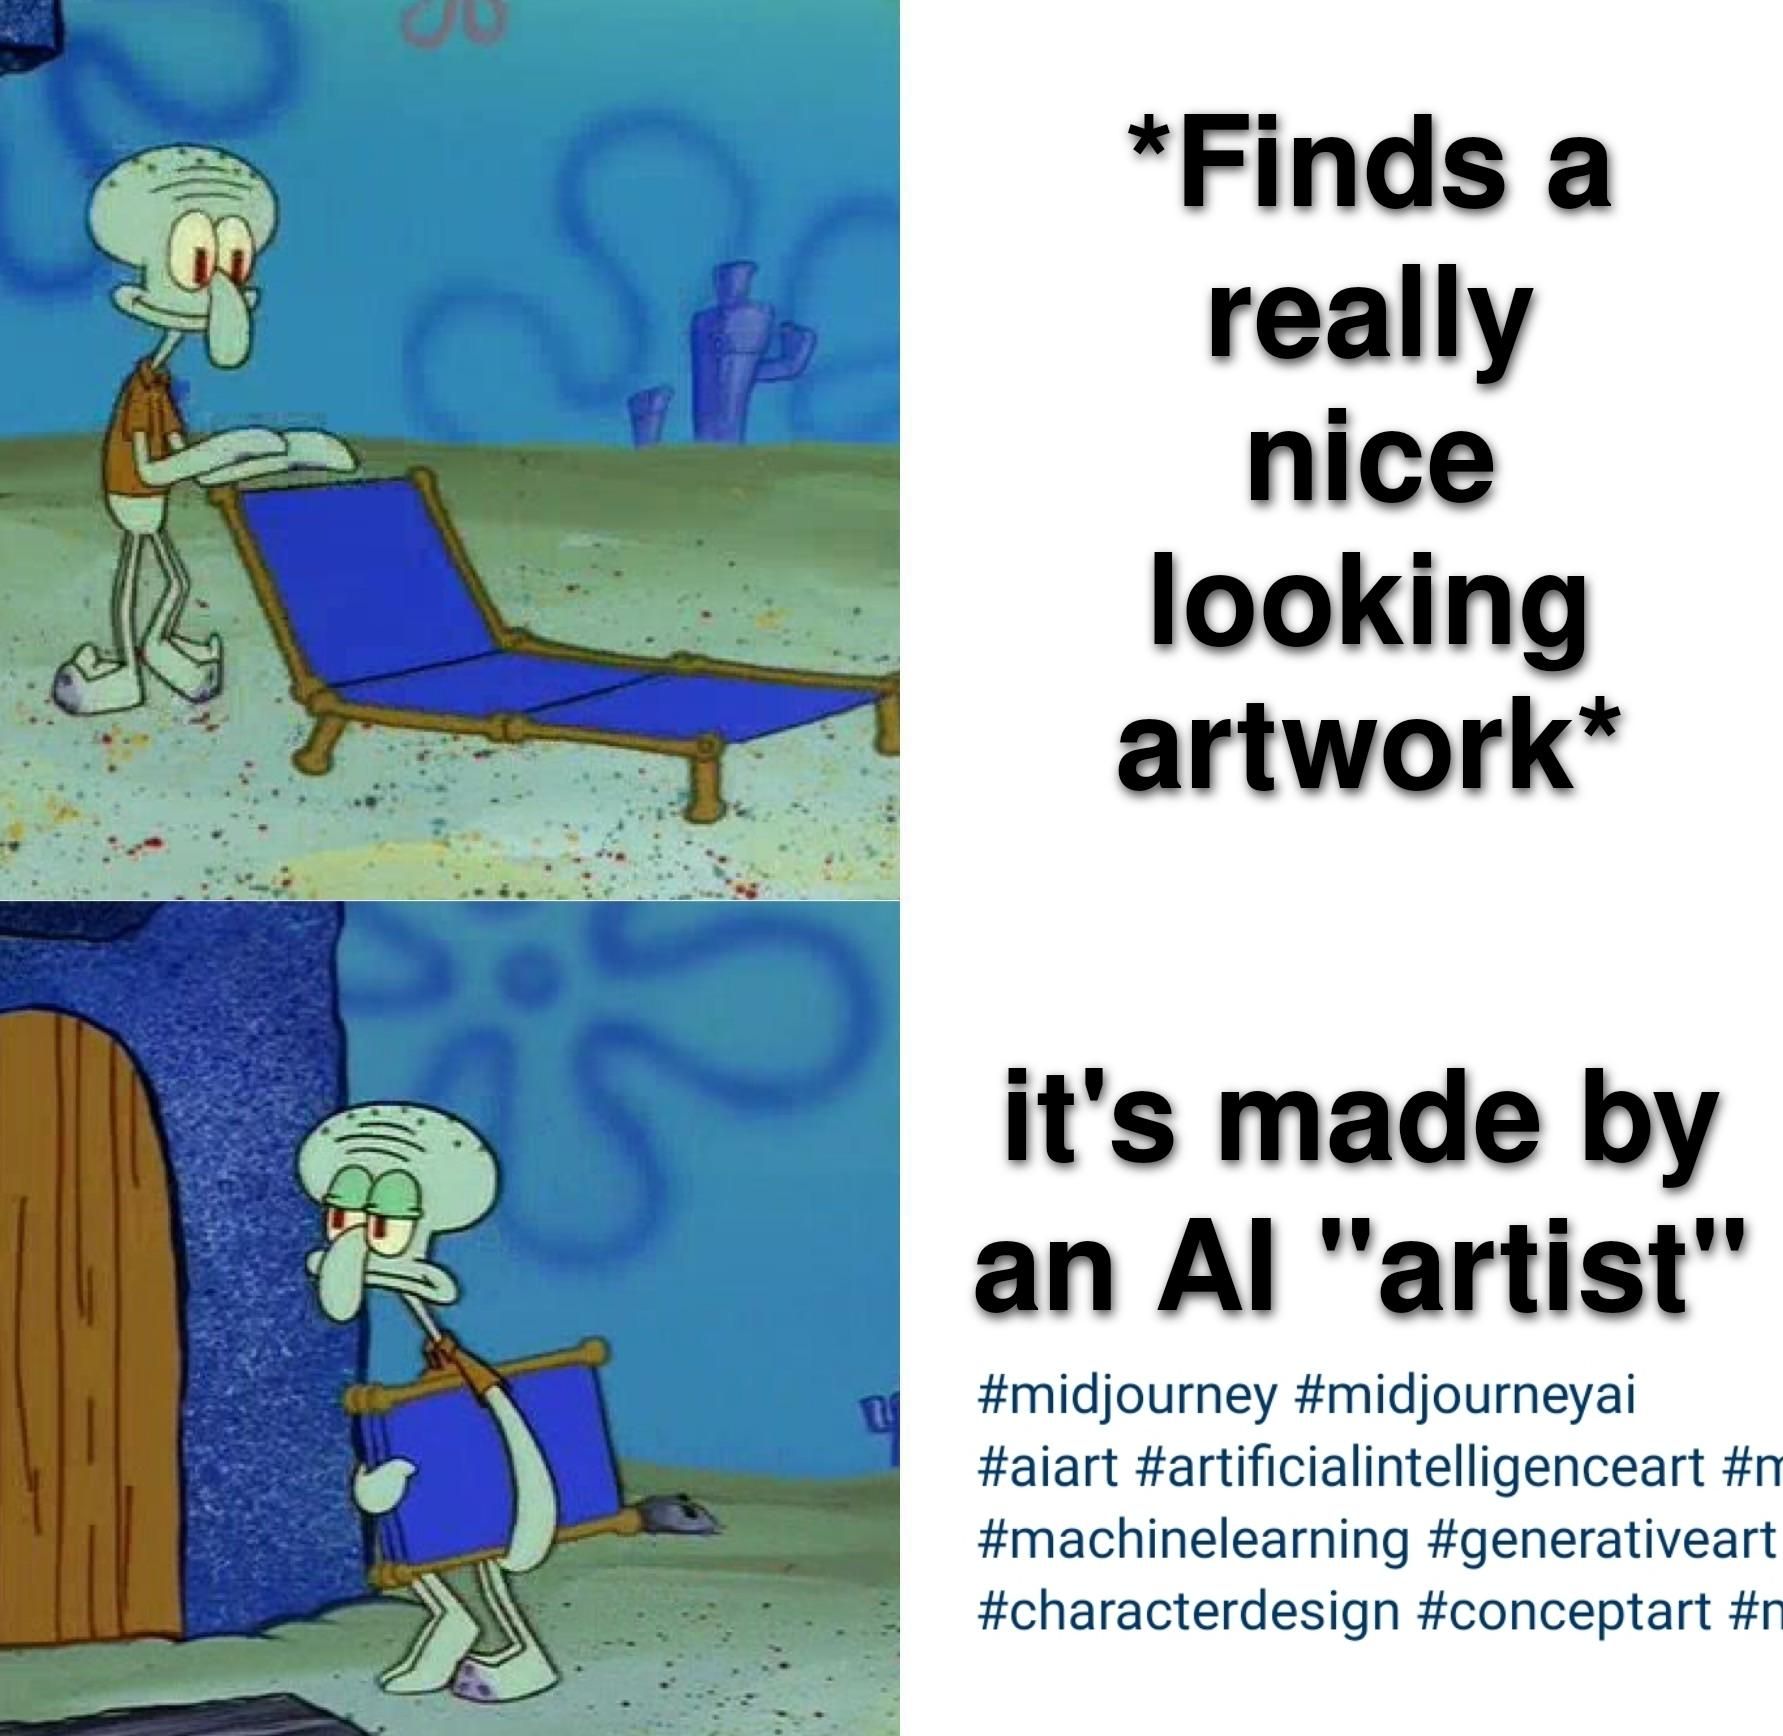 You have no talent